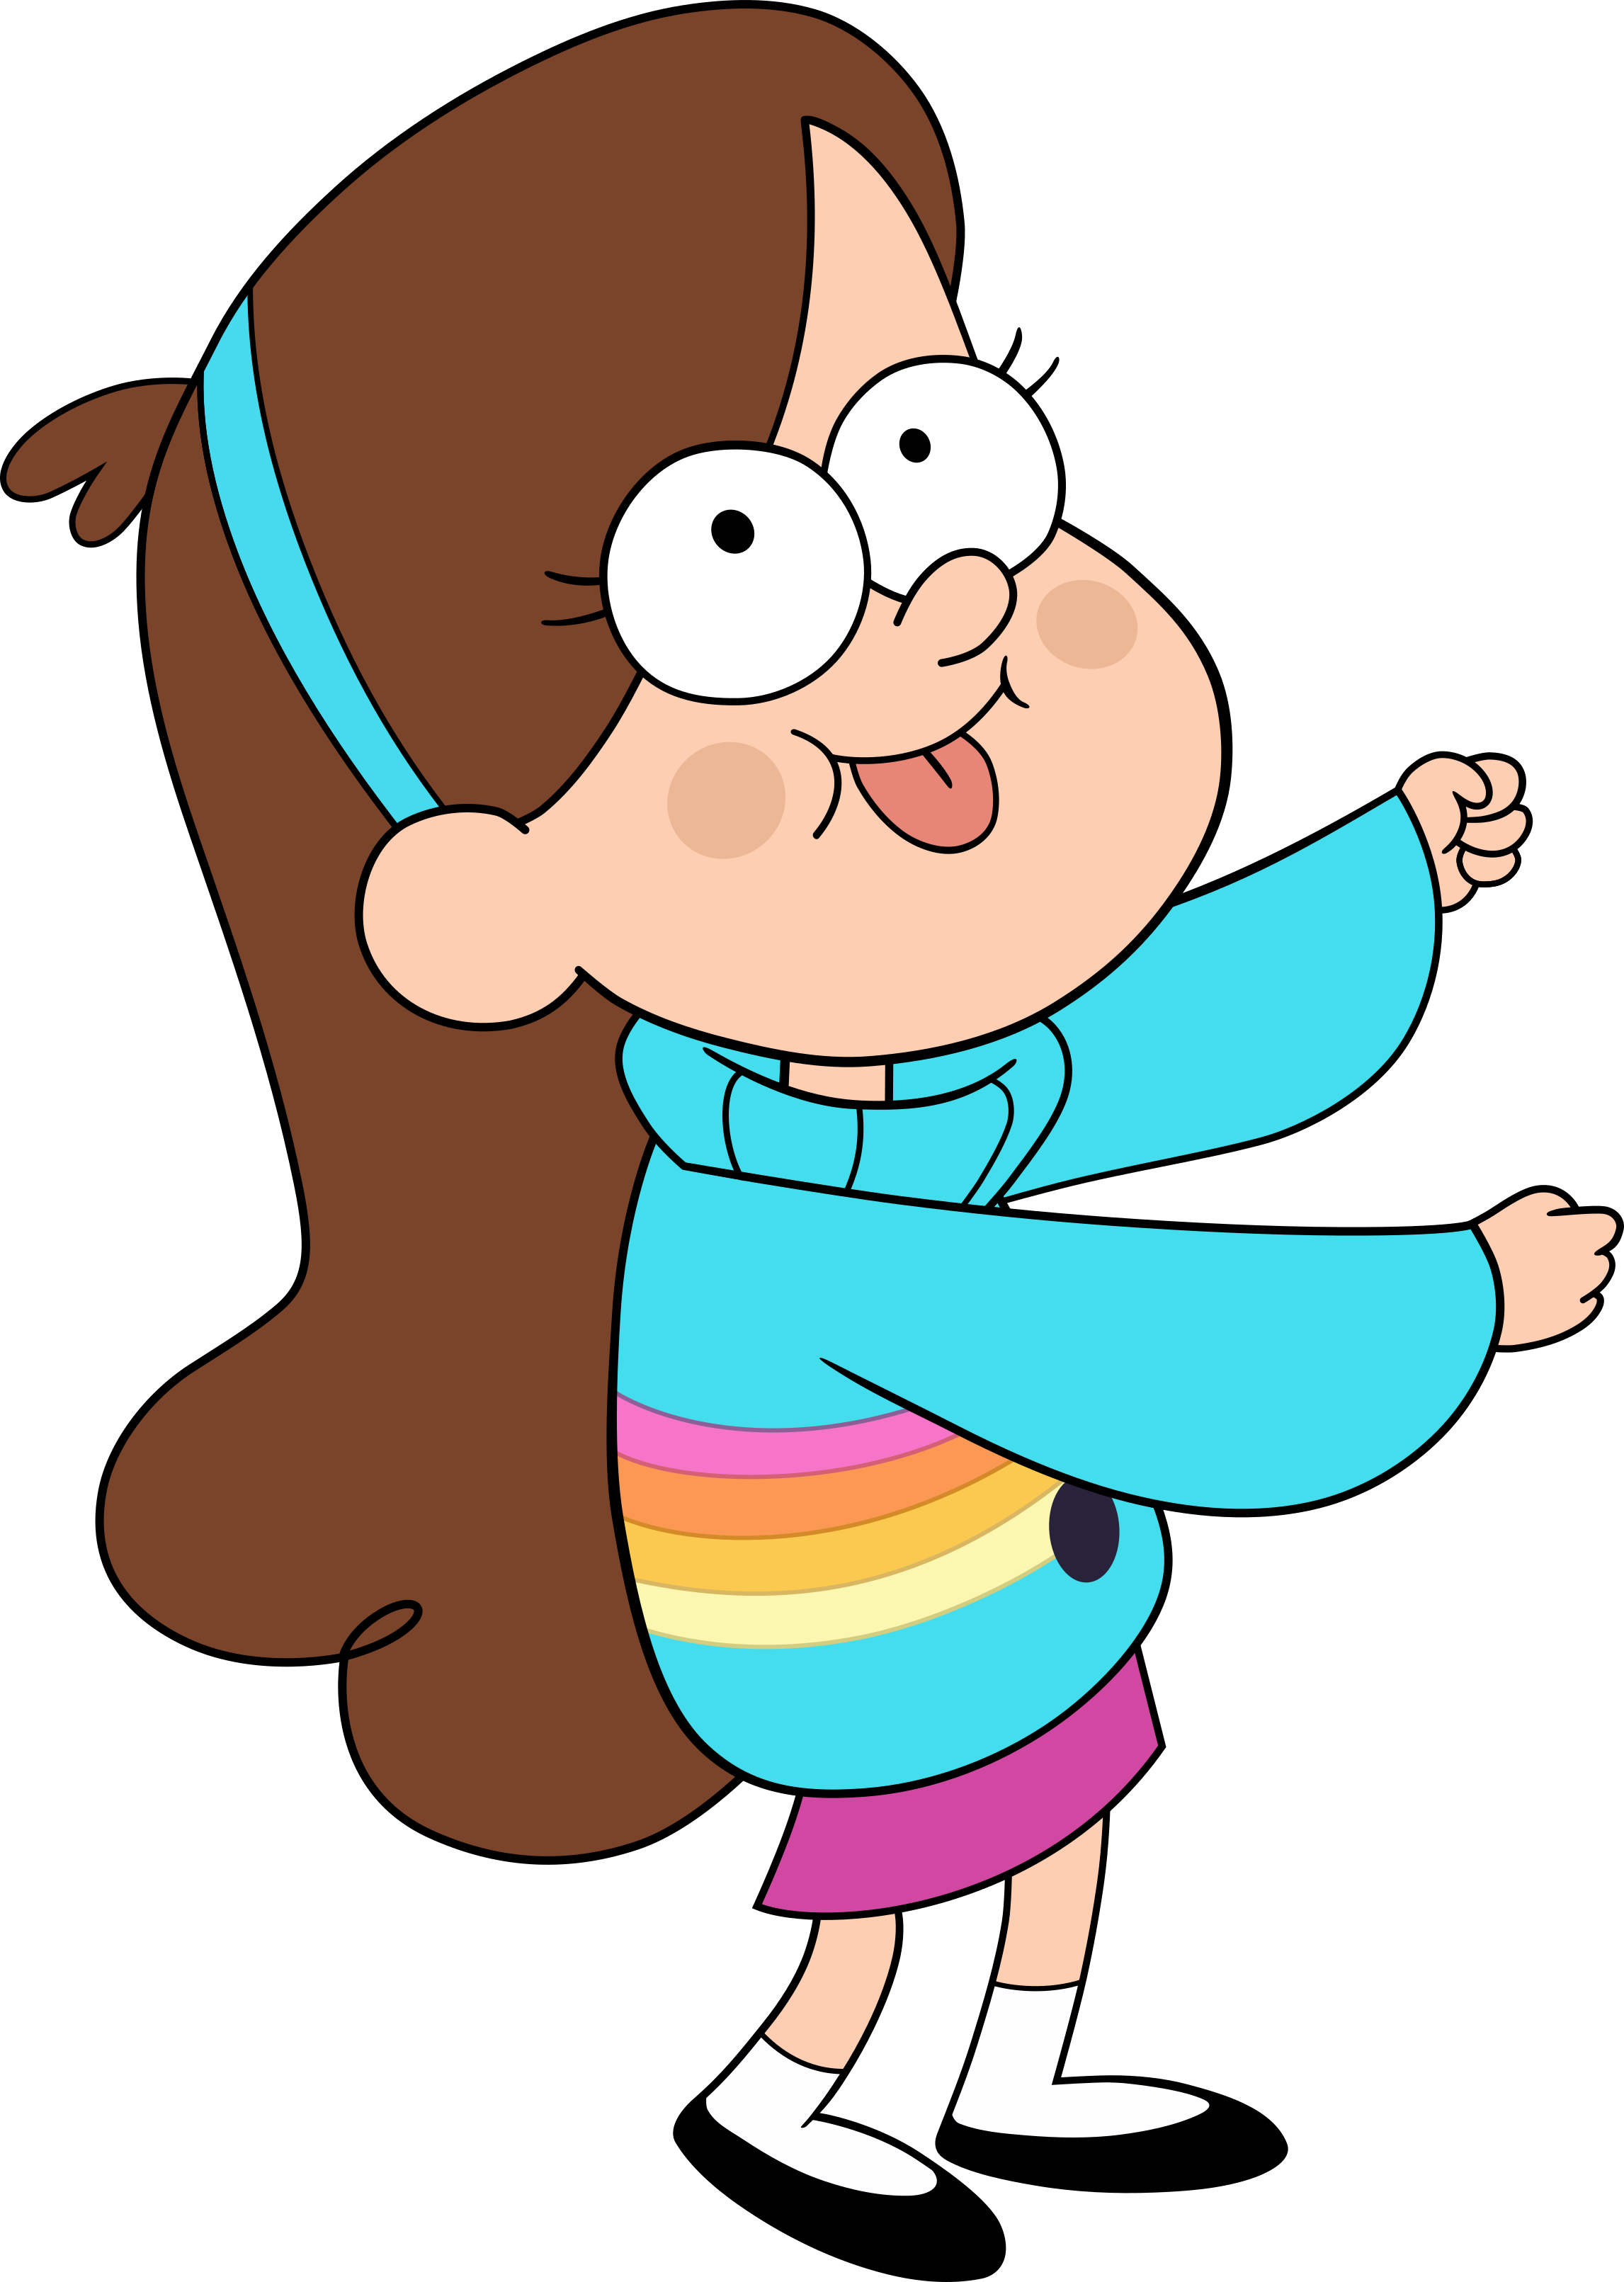 2293 X 3222 6 - Mabel From Gravity Falls (2293x3222)